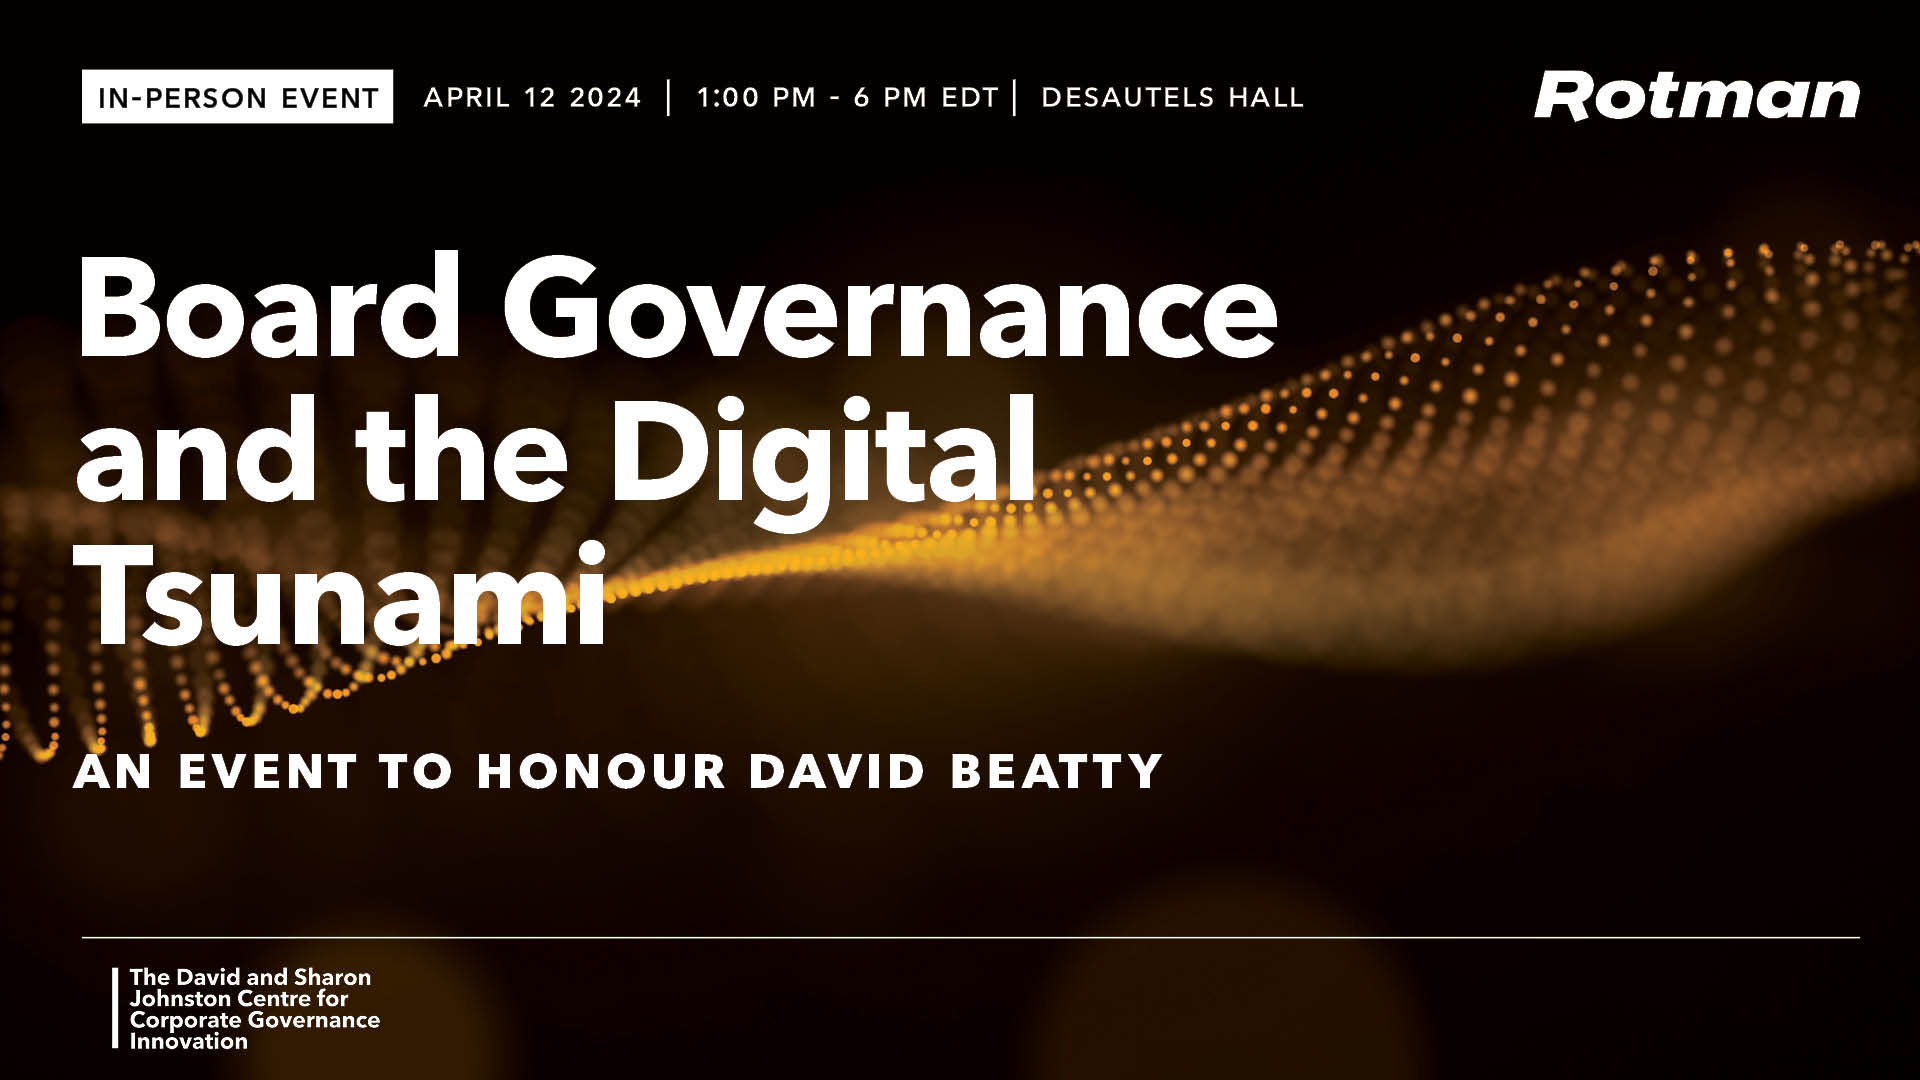 Board Governance and the Digital Tsunami | an event to honour David Beatty | April 12, 2024 | Click here to learn more